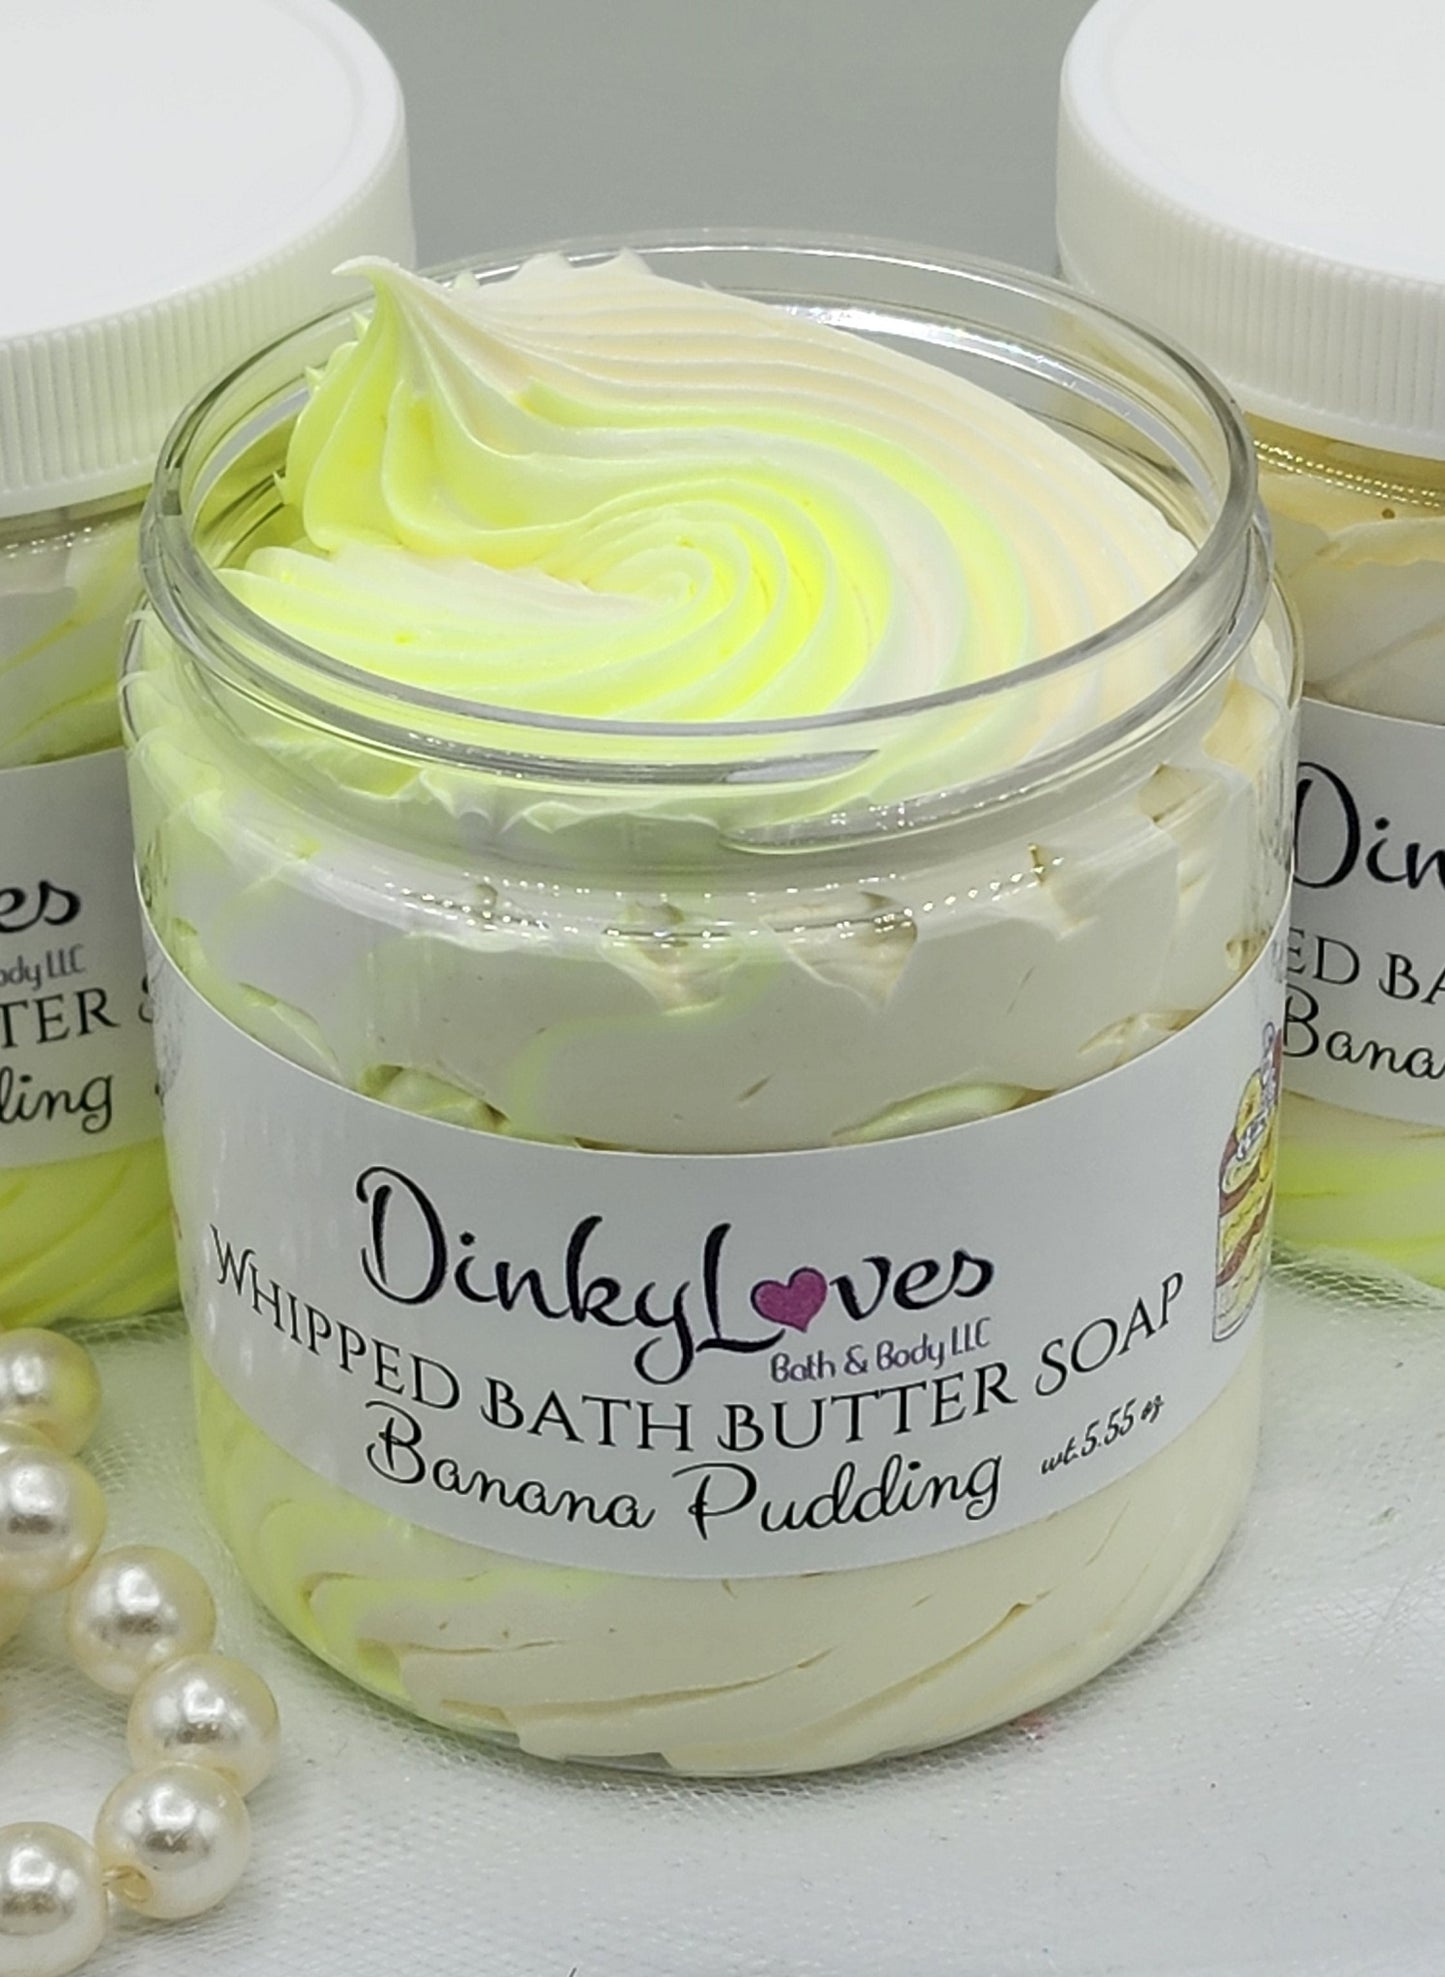 BANANA PUDDING Whipped Bath Butter Soap / Gift Idea / Luxury Product / Cocoa Butter